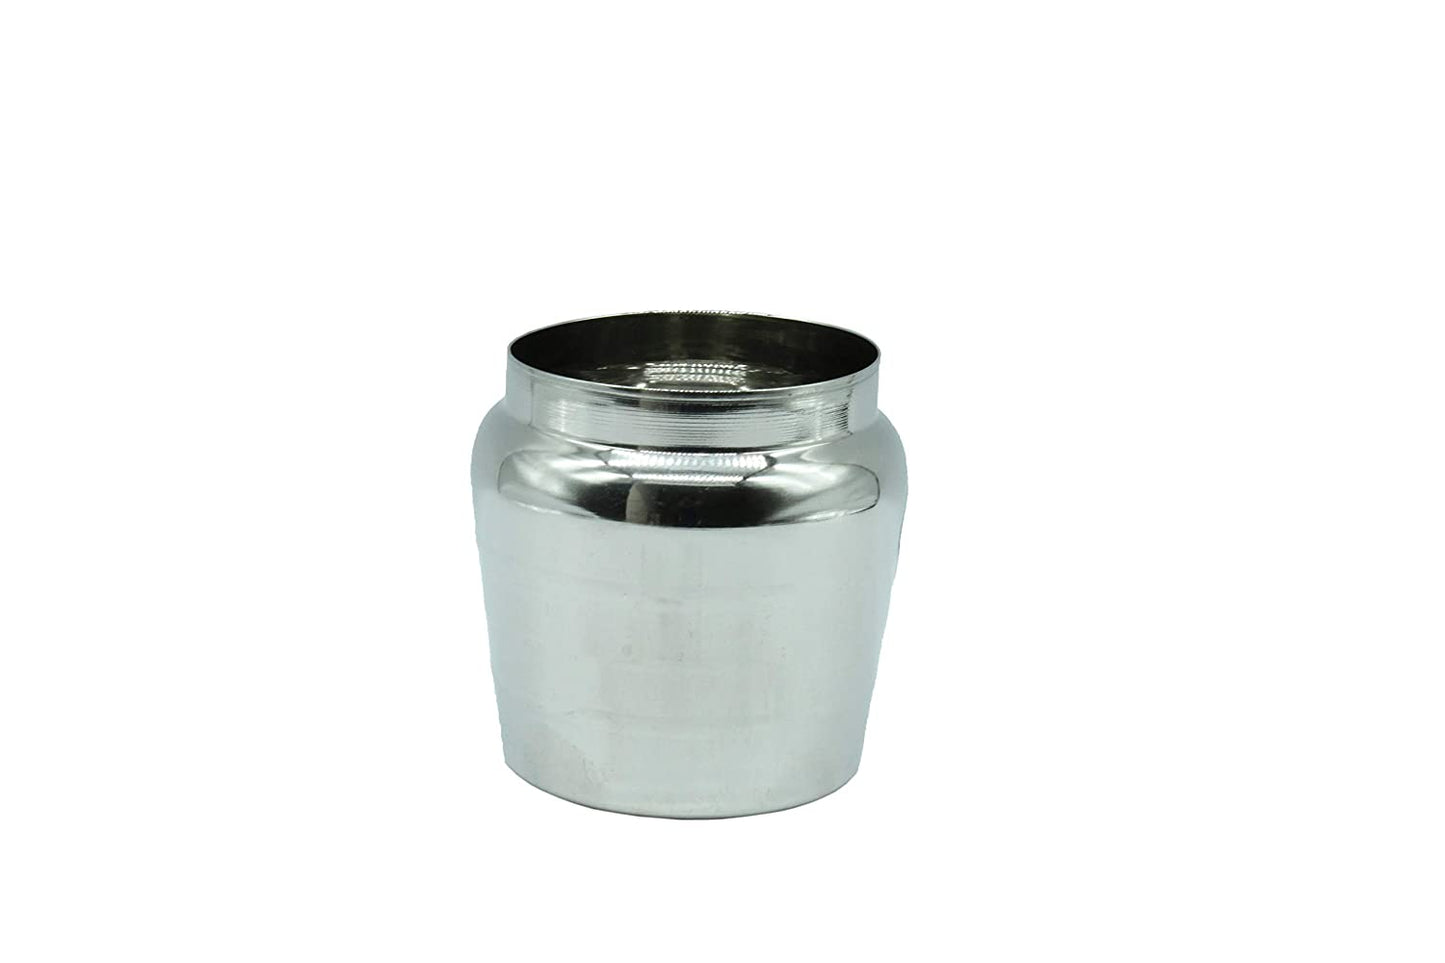 Stainless Steel Mushroom | Tapered Canister Set of 3 Pcs